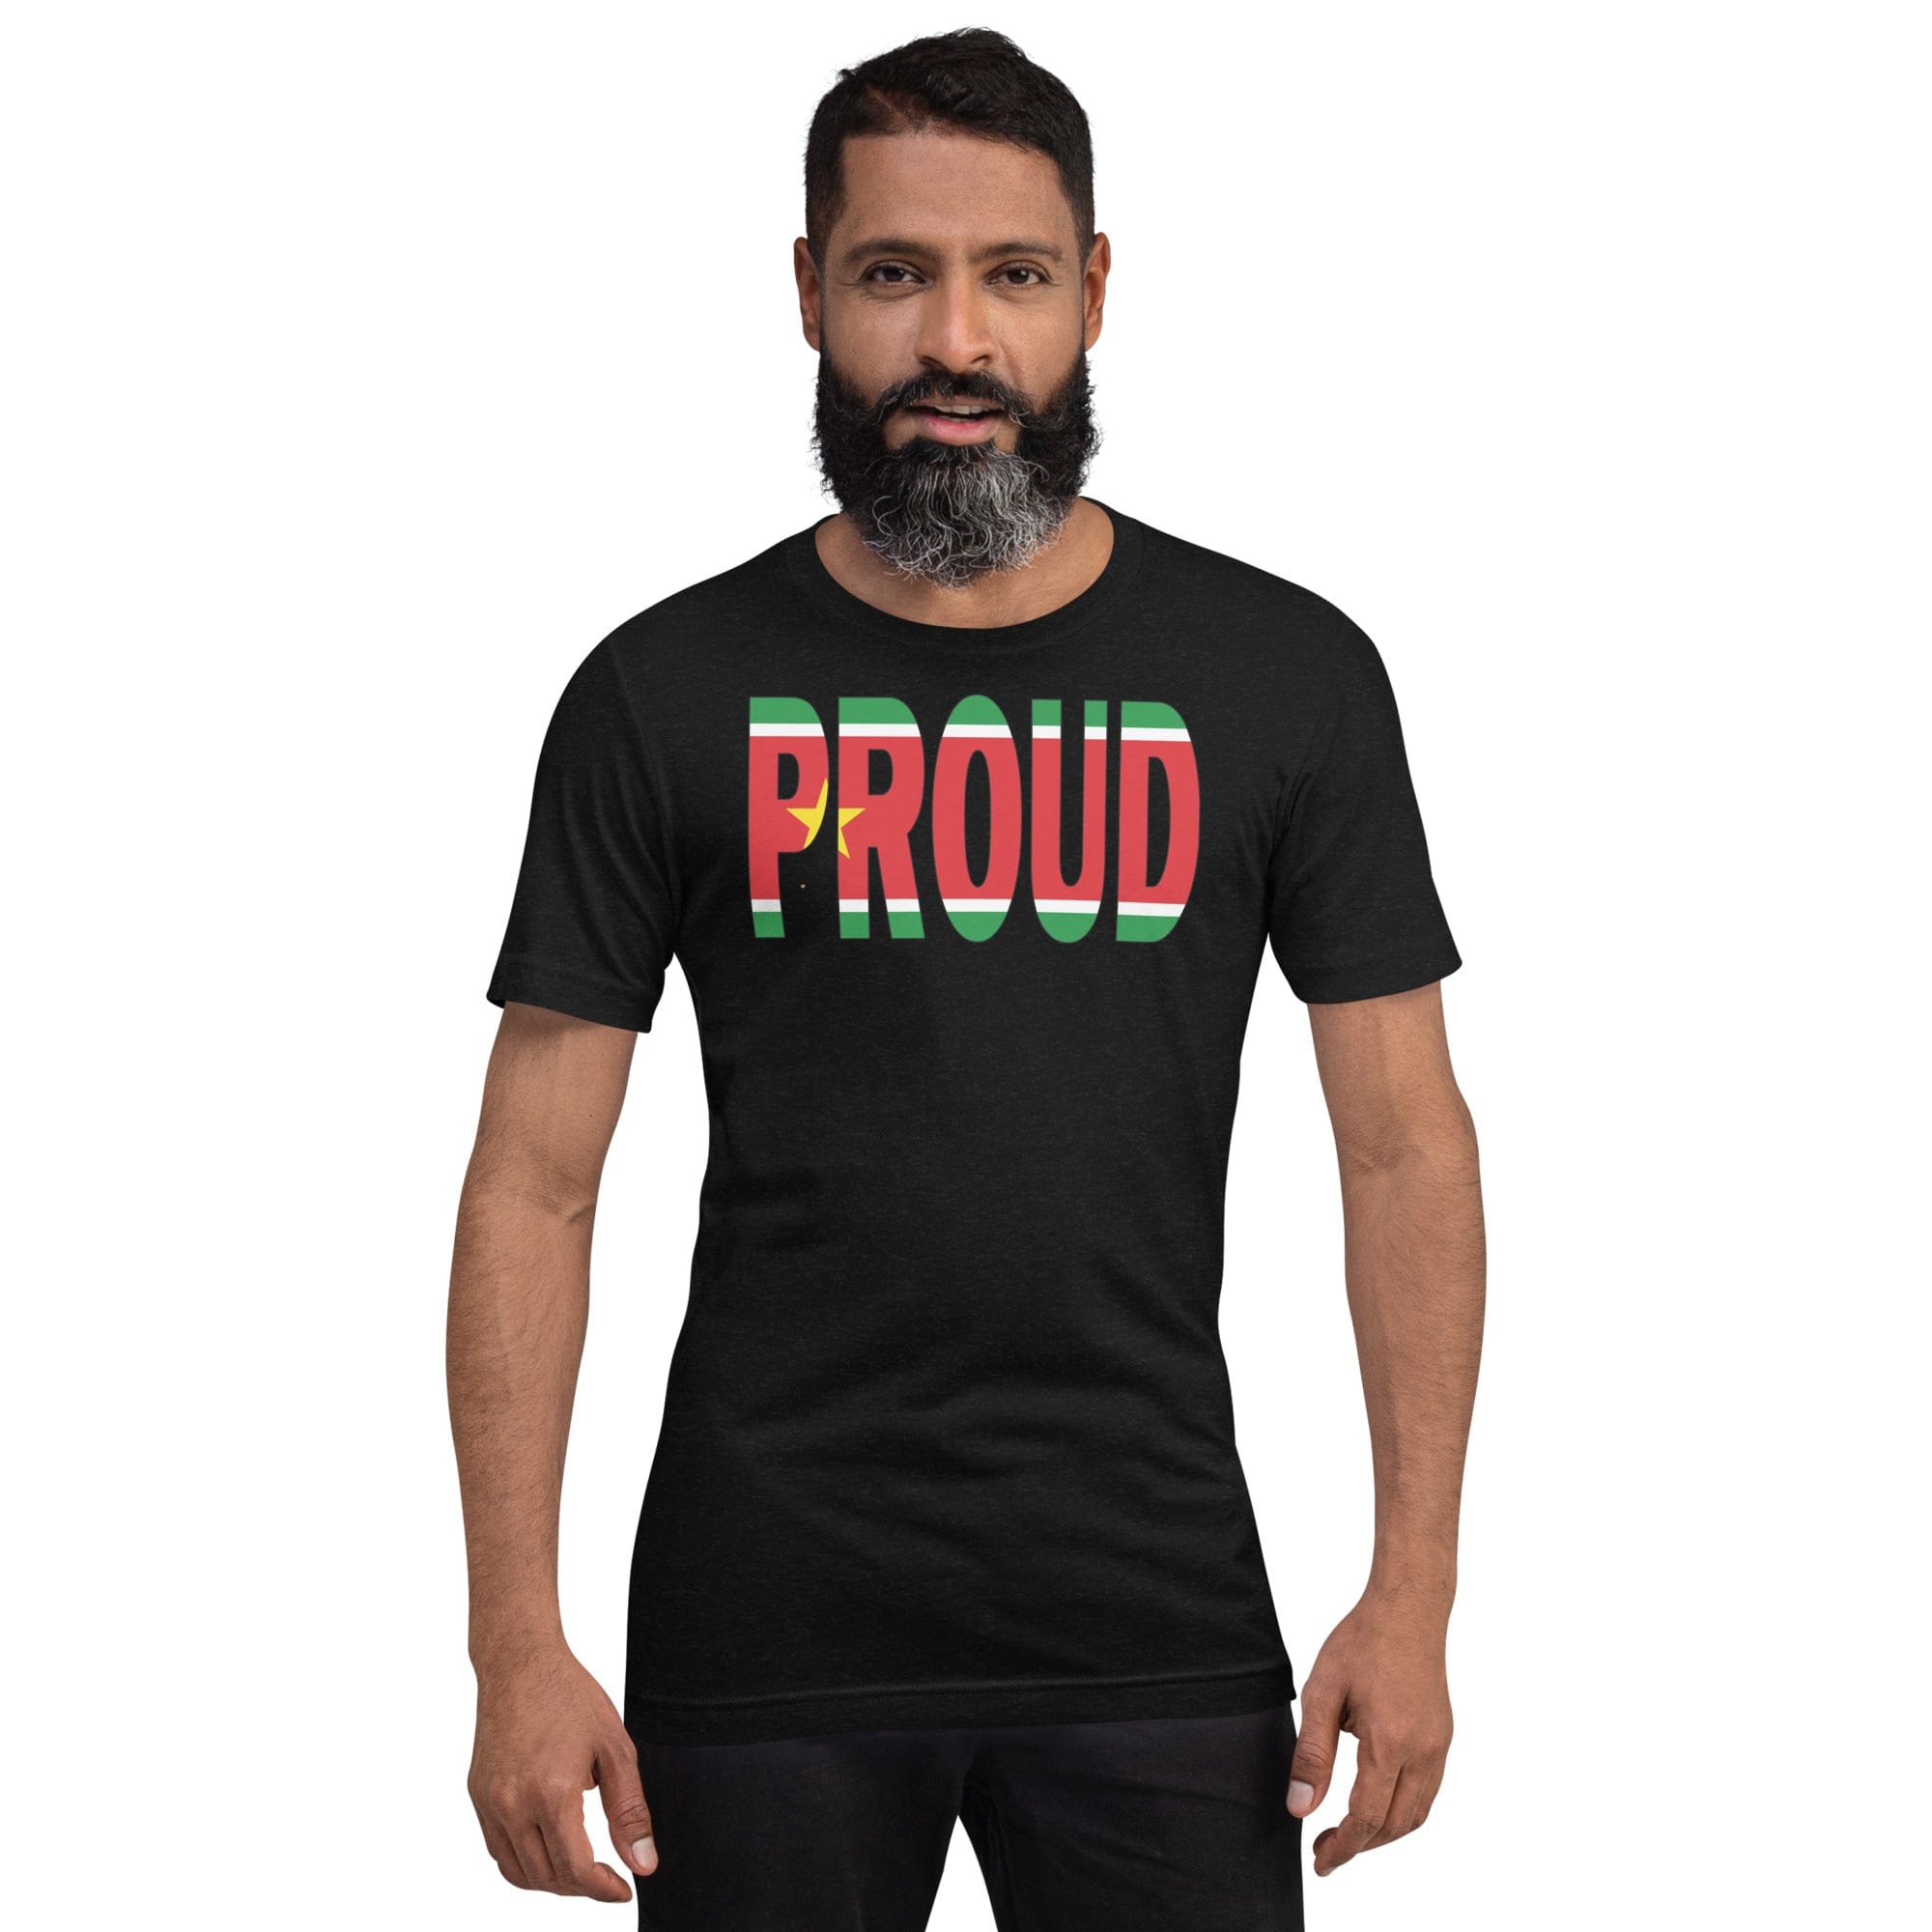 Guadeloupe Flag designed to spell Proud on a black color t-shirt worn by a black man.